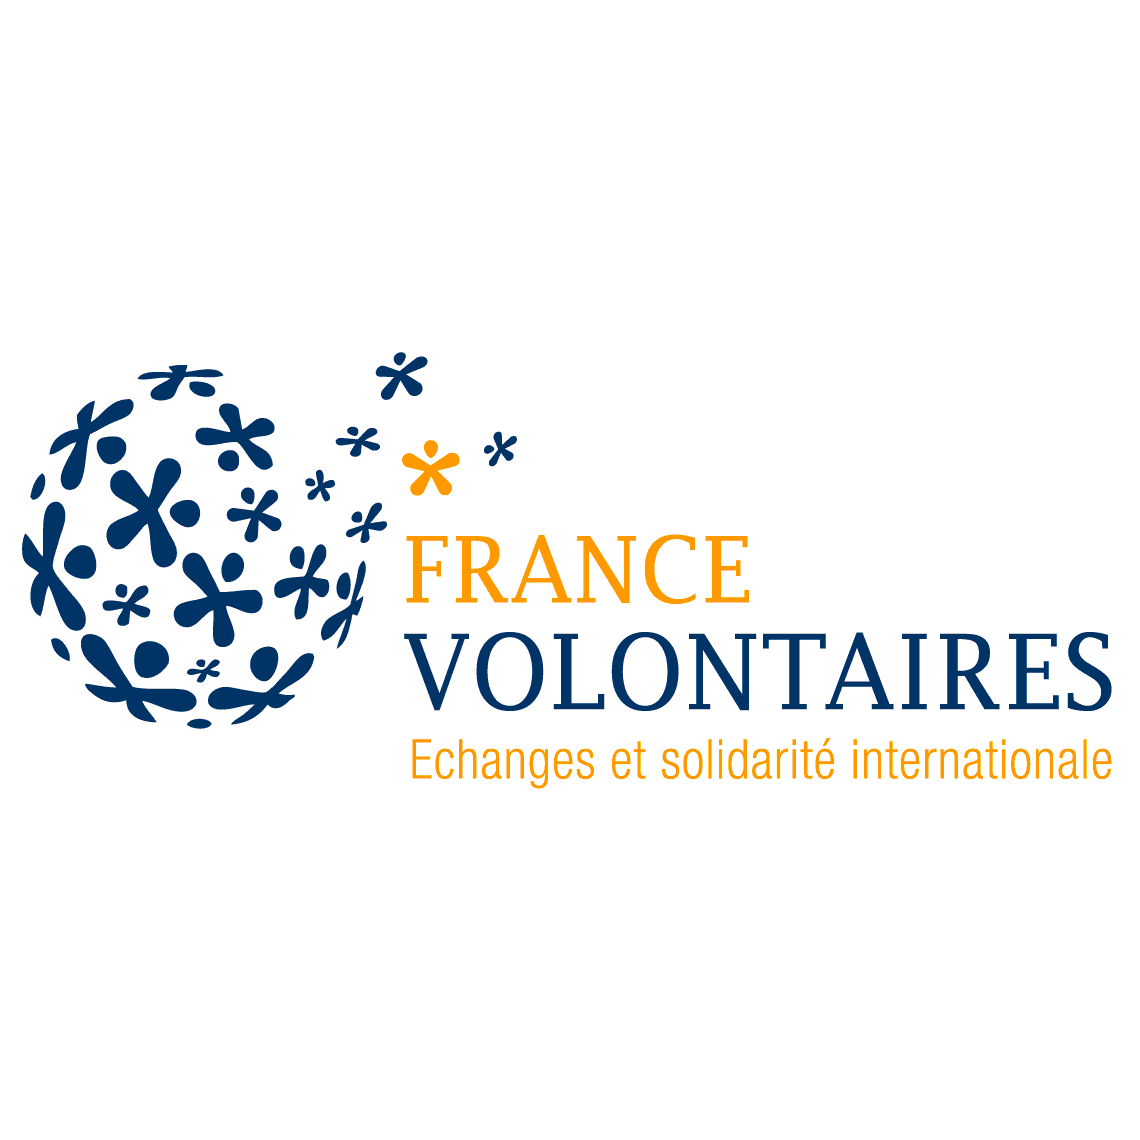 Logo France Volontaires